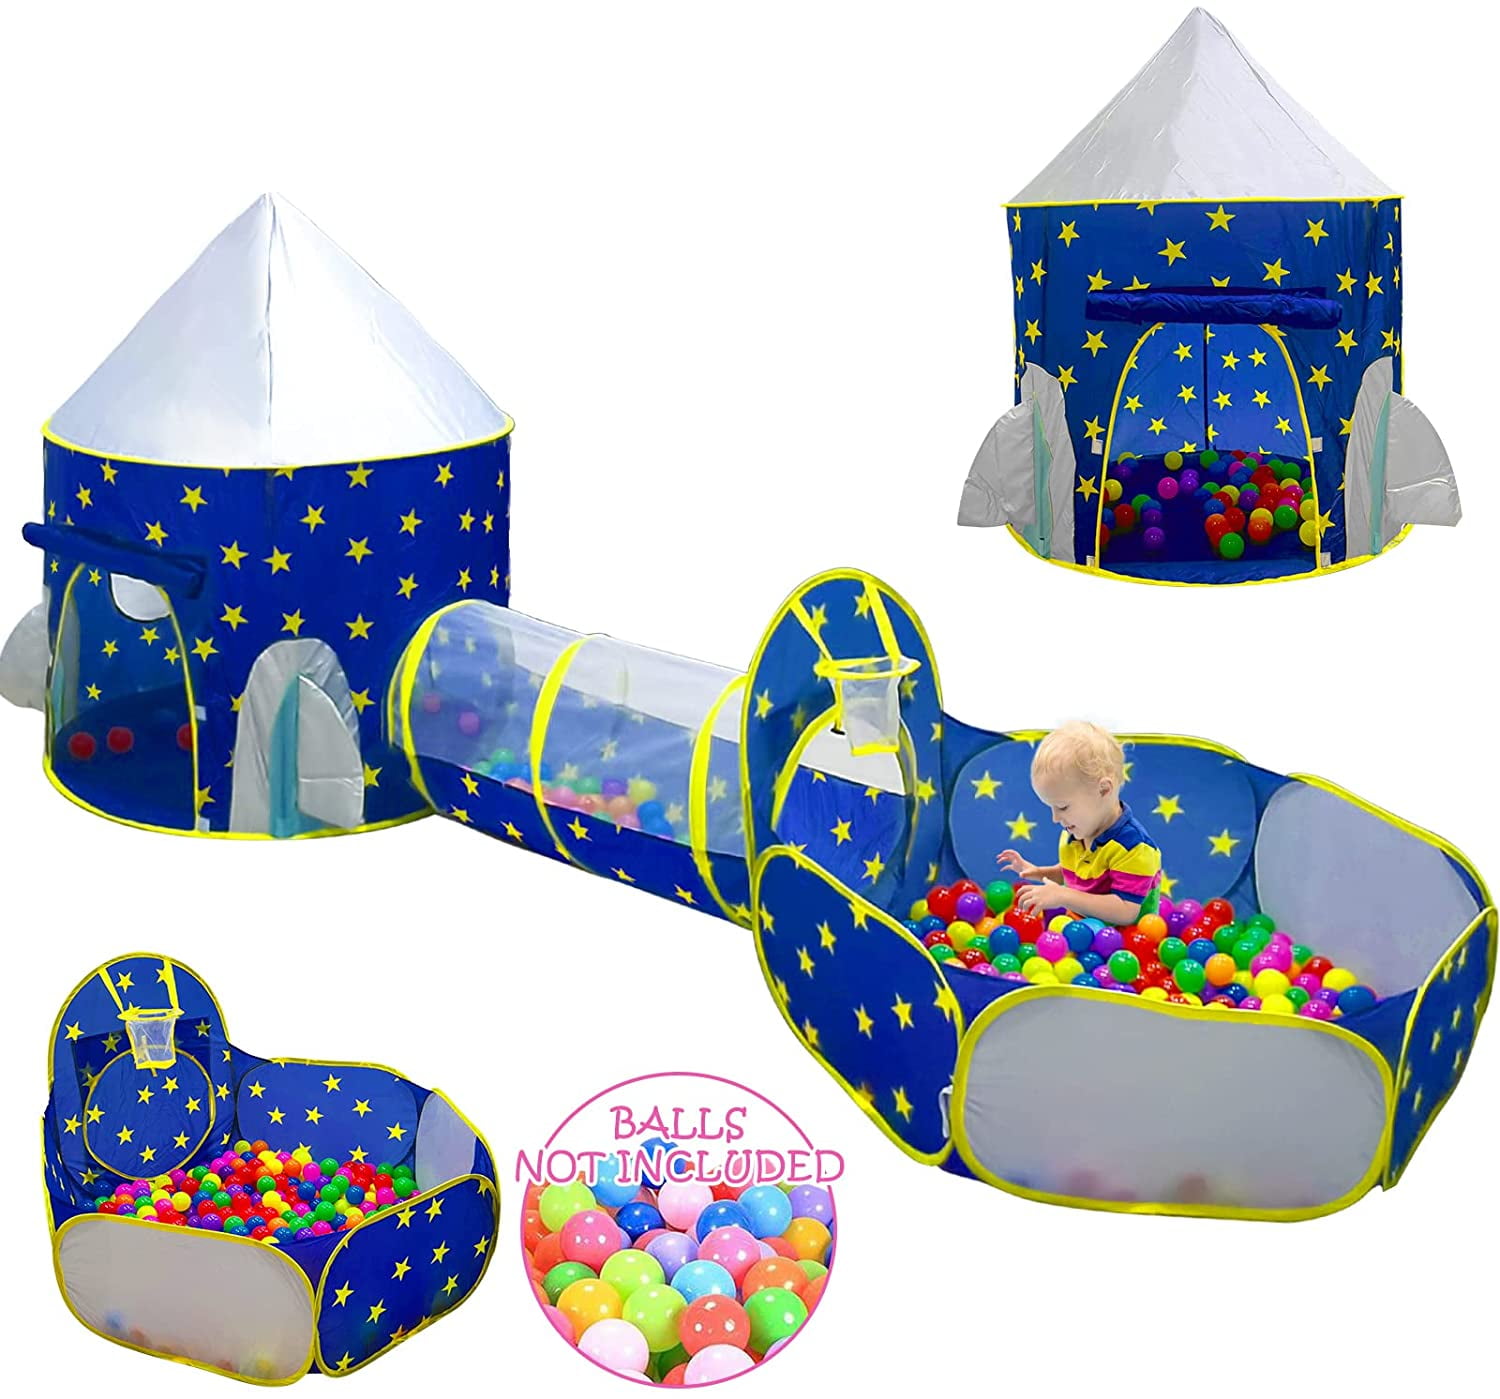 3 In1 Kids Play Tent Toddler Tunnel Balls Pit Pop Up Cubby Playhouse Toy V7L9 